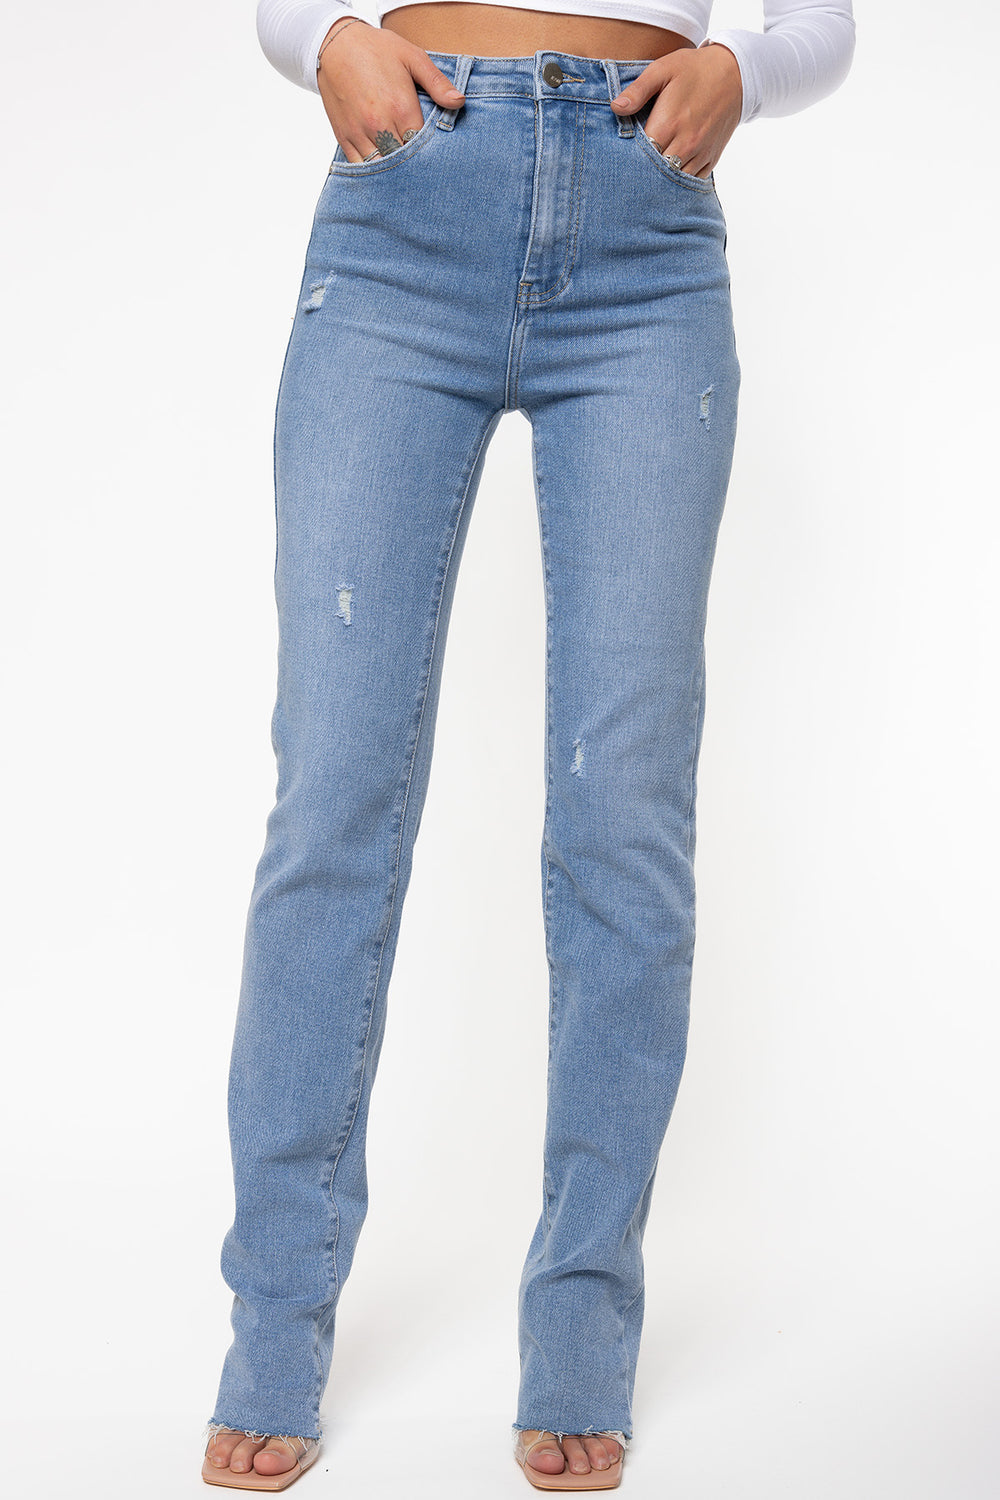 Quency Stretch Straight Leg Jeans - EXTRA TALL Jeans Routines Fashion   